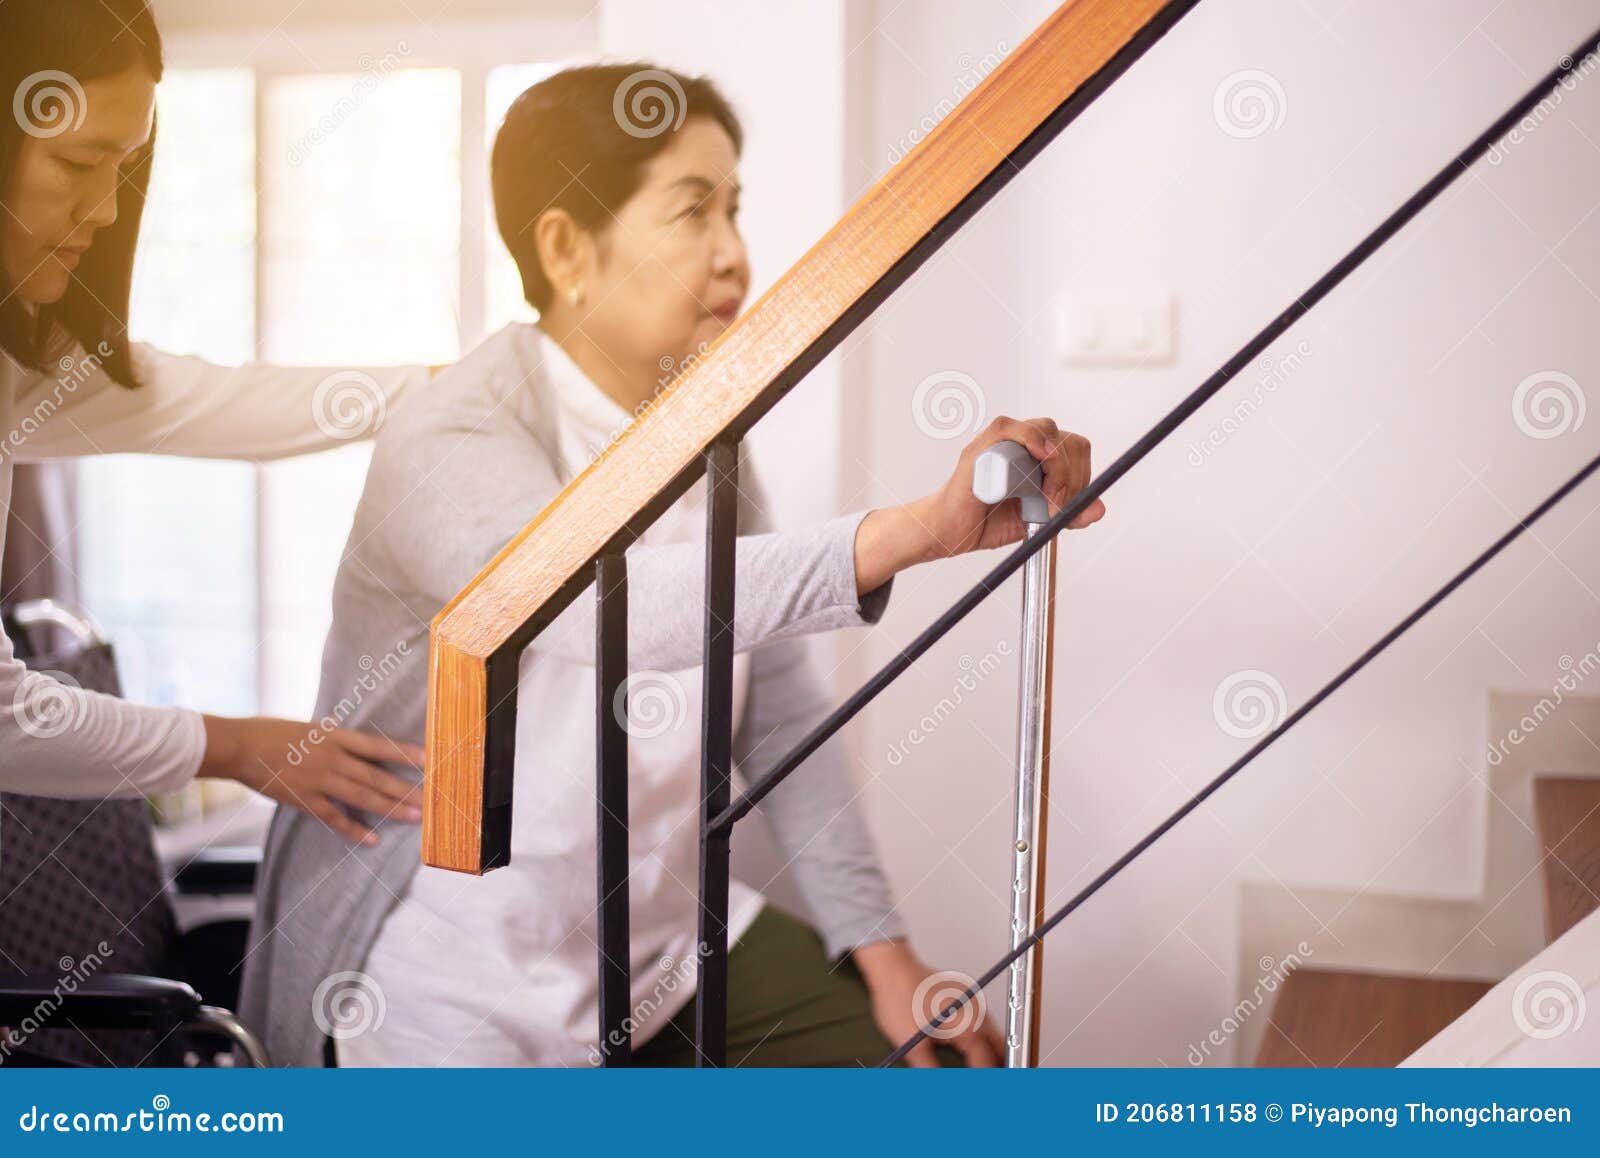 elderly woman hands holding sticks while walking up stair at home,caregiving take care and support,self-care for family caregivers